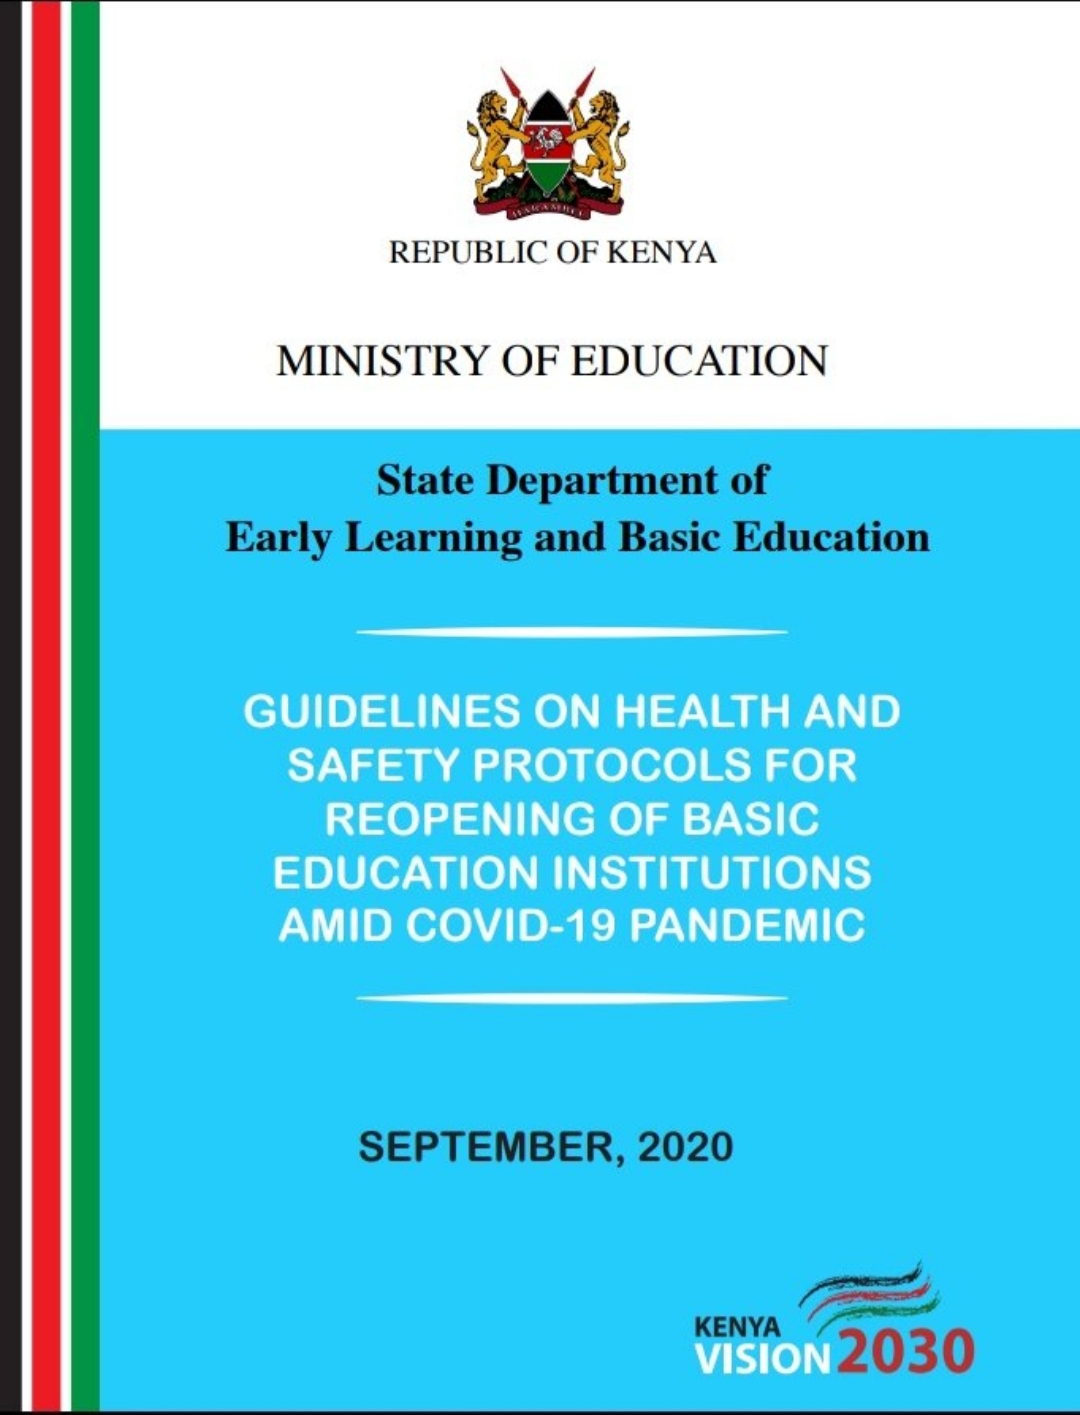 Ministry Of Education Guidelines On Health And Safety Protocols For Reopening Of Basic Education Institutions Amid Covid-19 Pandemic